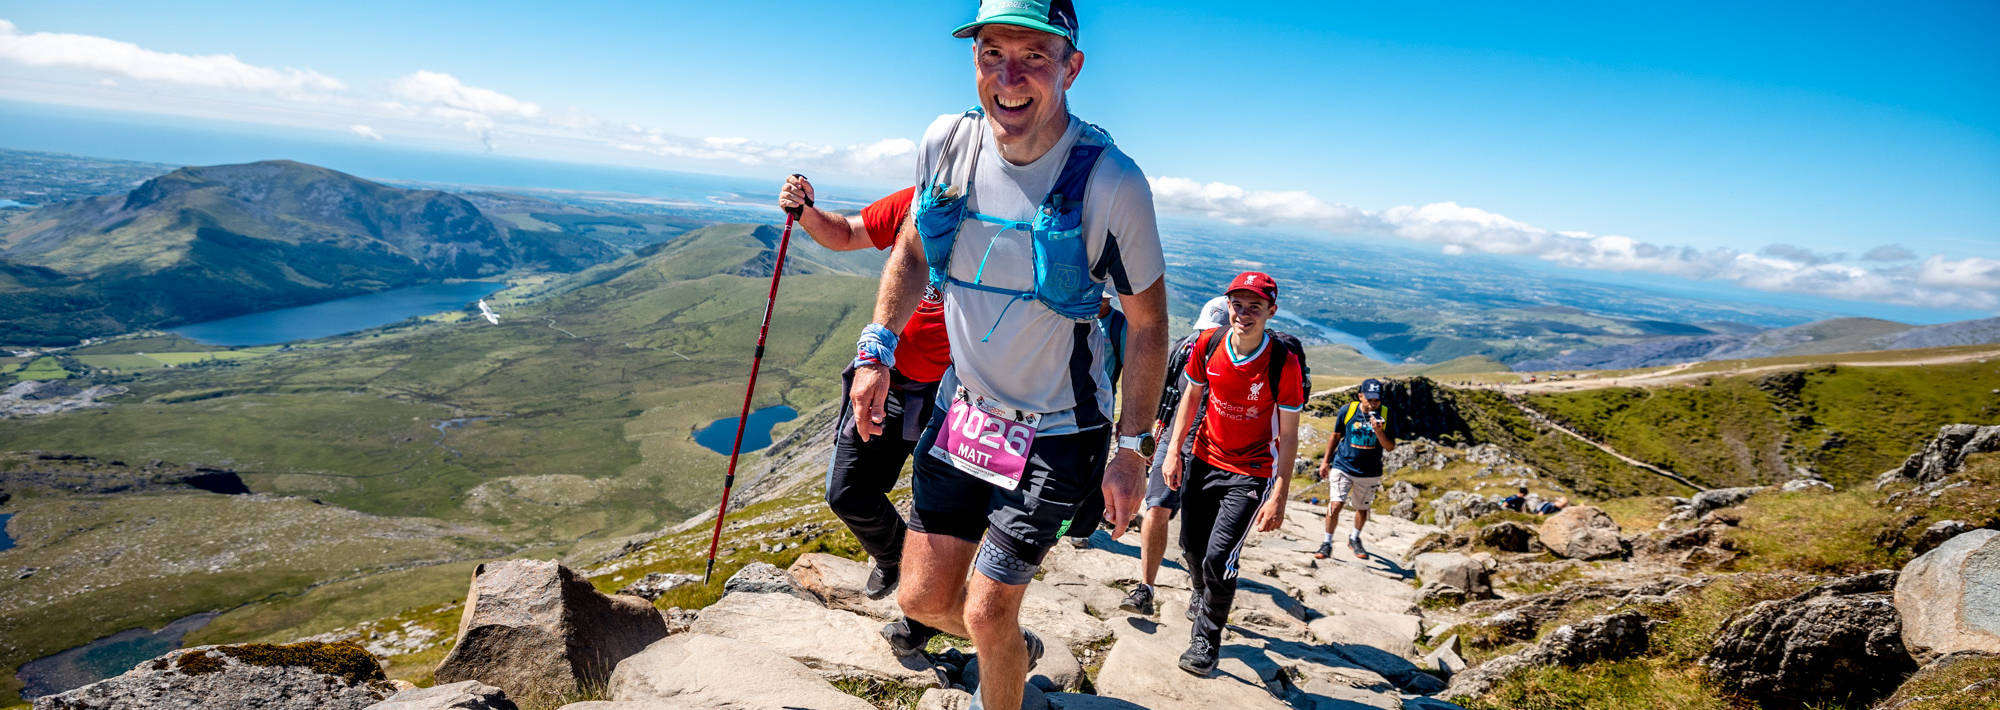 Charity runners on the Snowdon24 ultra trail snowdon challenge.